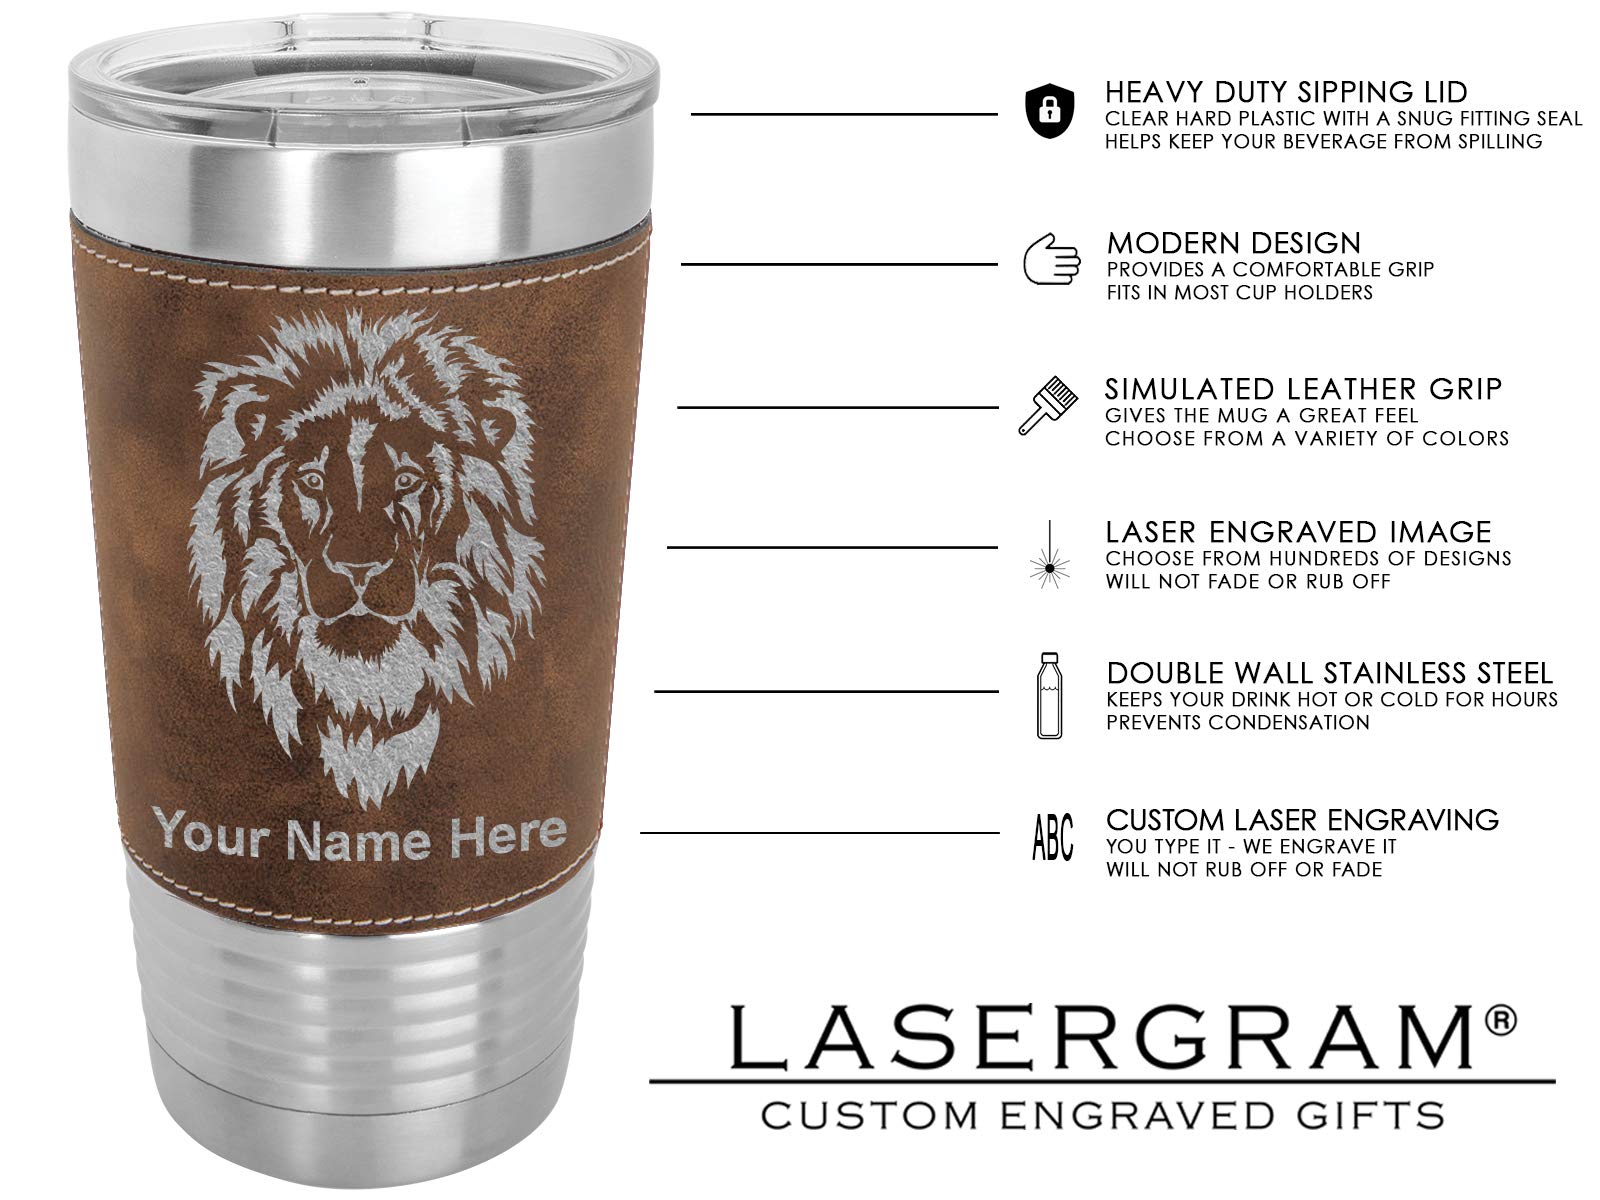 LaserGram 20oz Vacuum Insulated Tumbler Mug, Alien Head, Personalized Engraving Included (Faux Leather, Rustic)